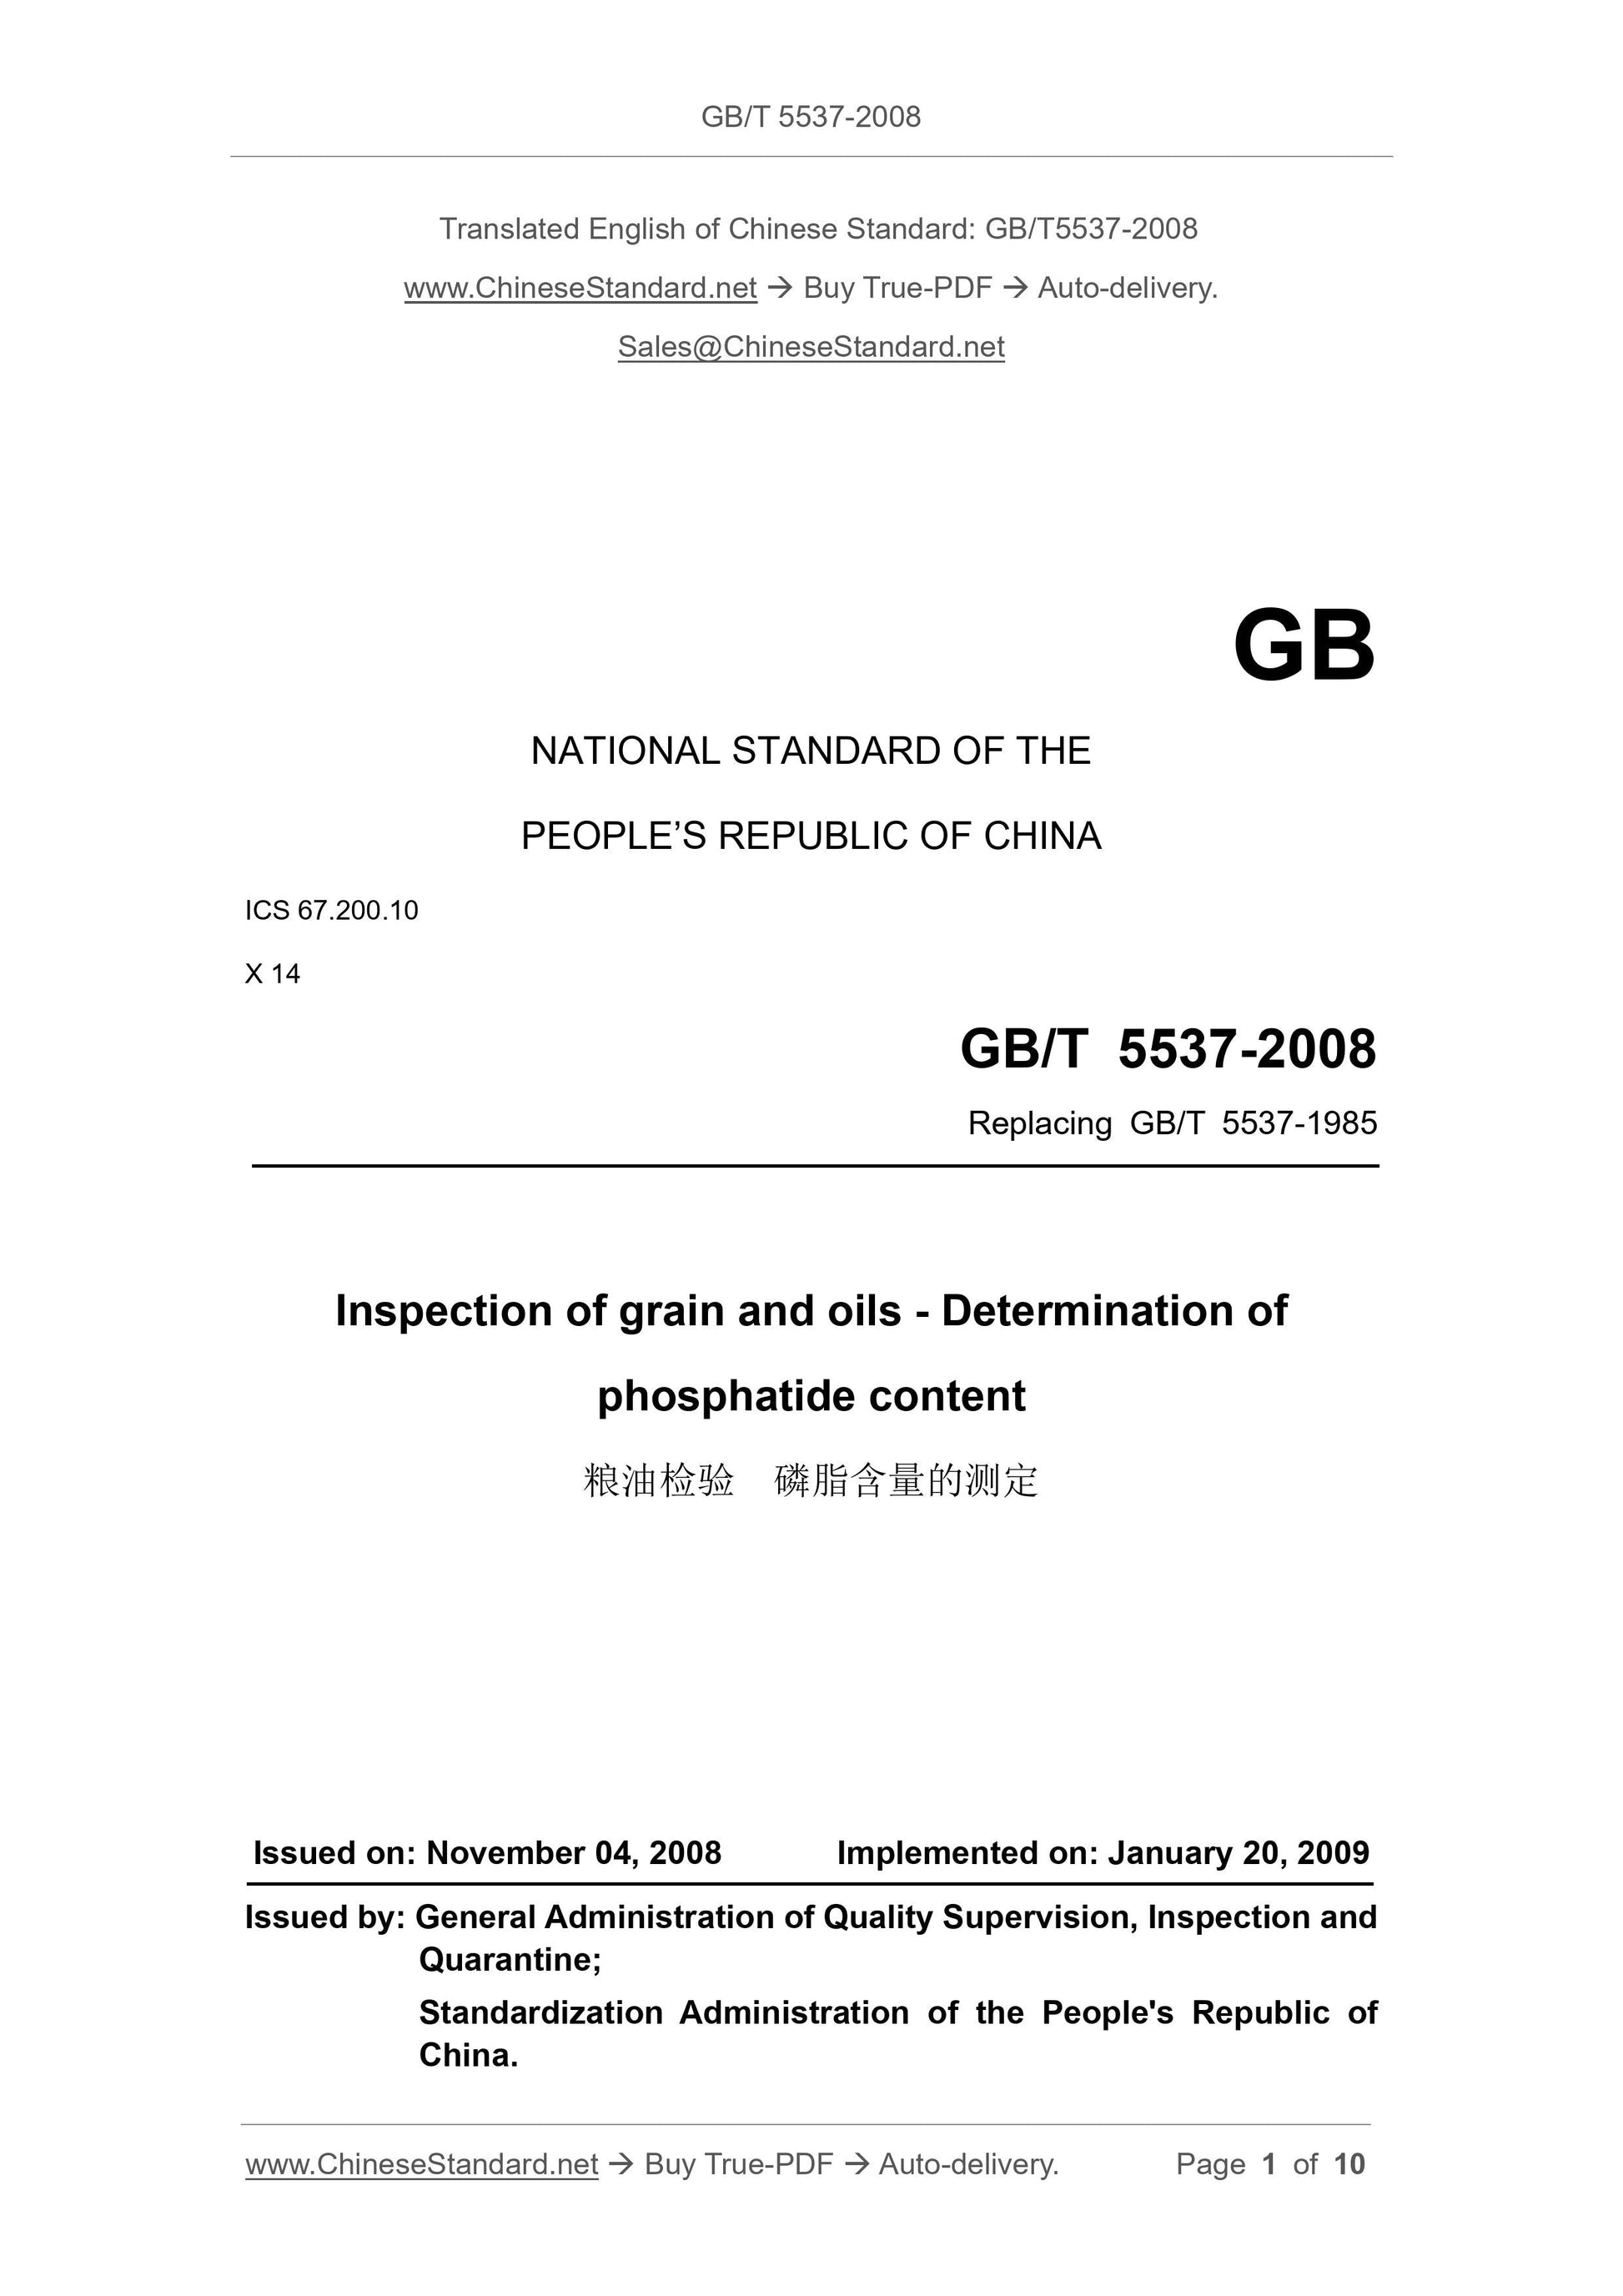 GB/T 5537-2008 Page 1